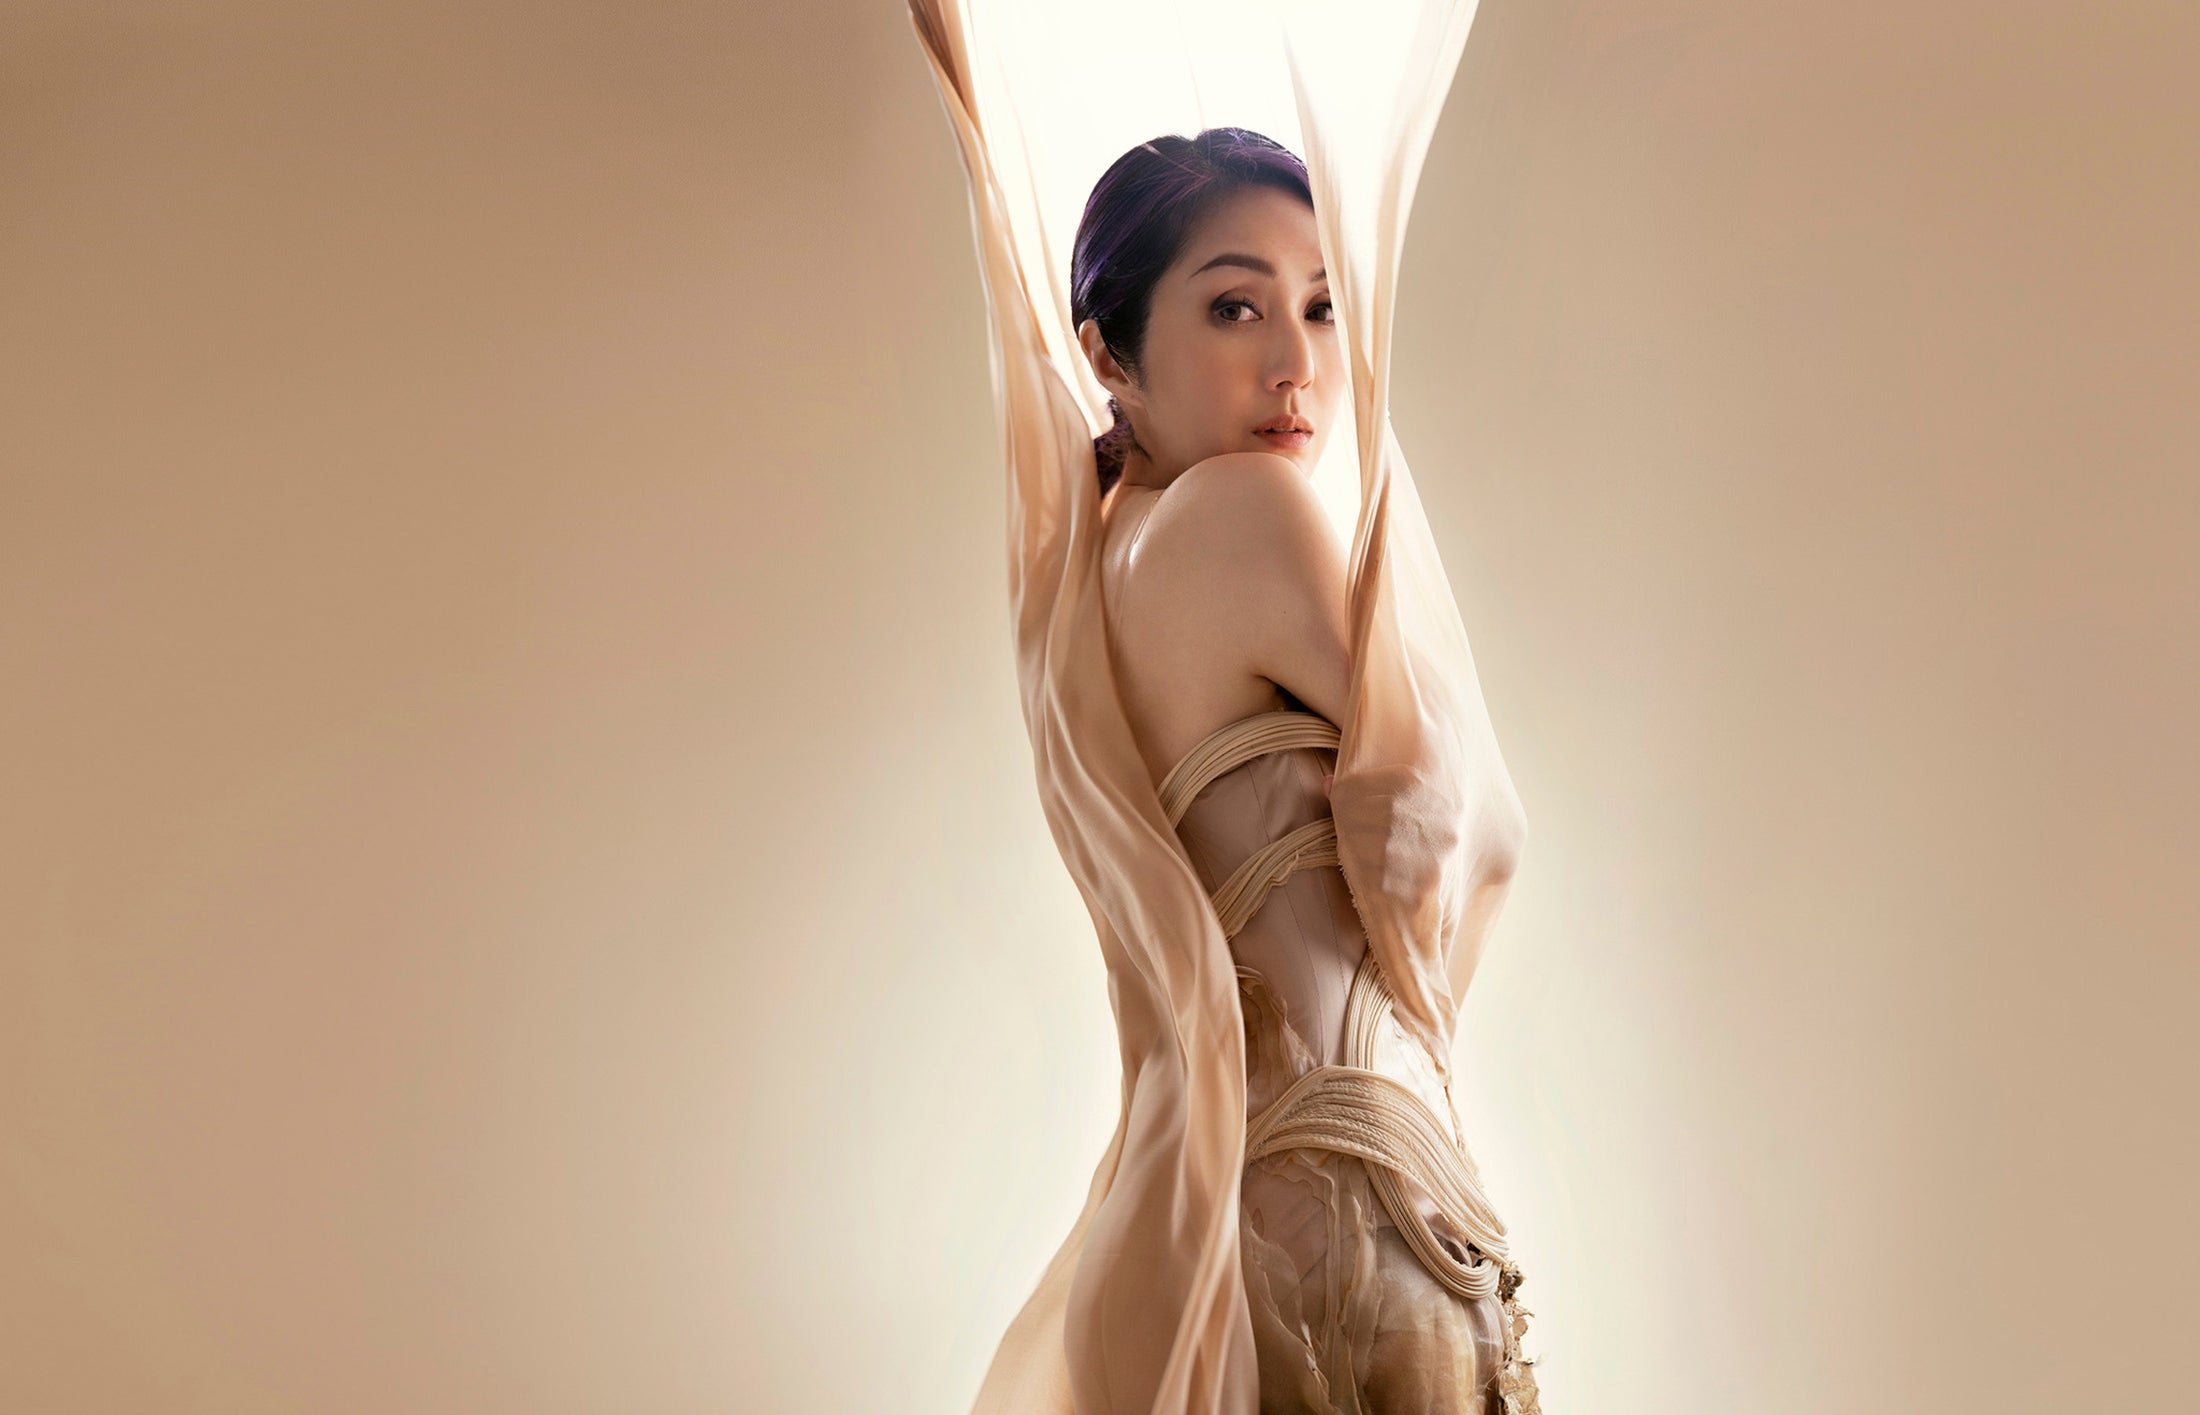 updated presale code to Miriam Yeung: My Tree of Live World Tour advanced tickets in Las Vegas at The Cosmopolitan of Las Vegas